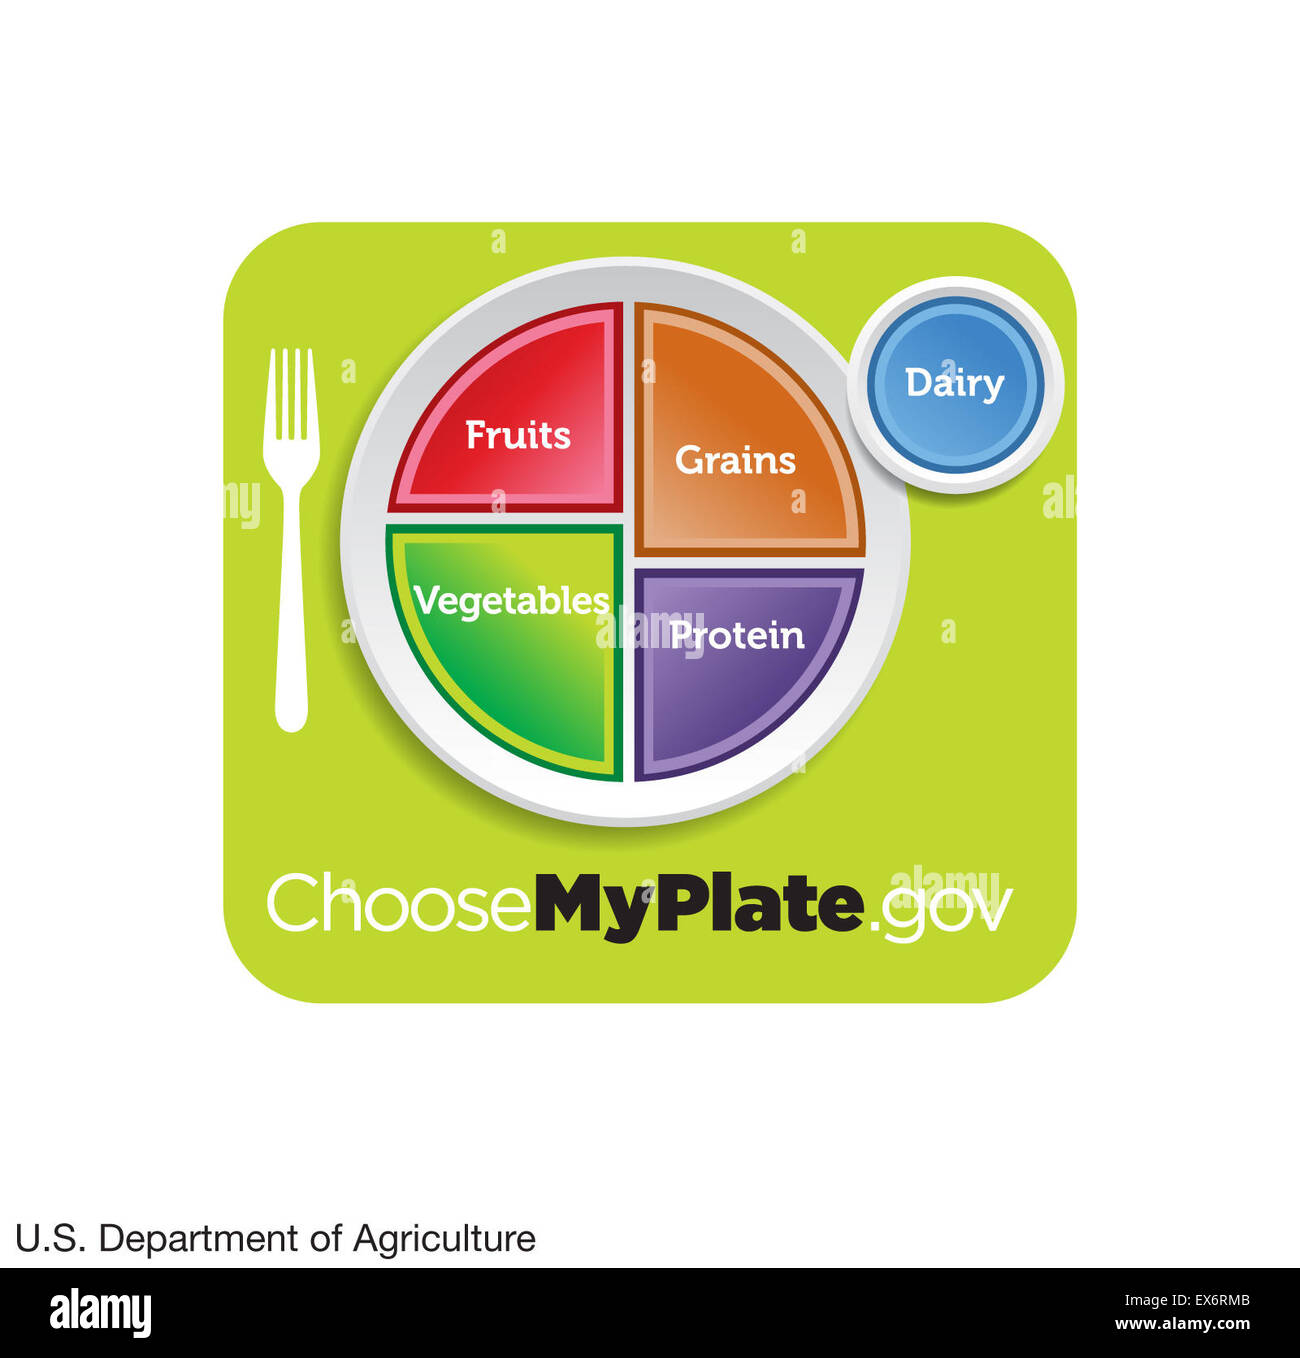 MyPlate, dietary guidelines Banque D'Images